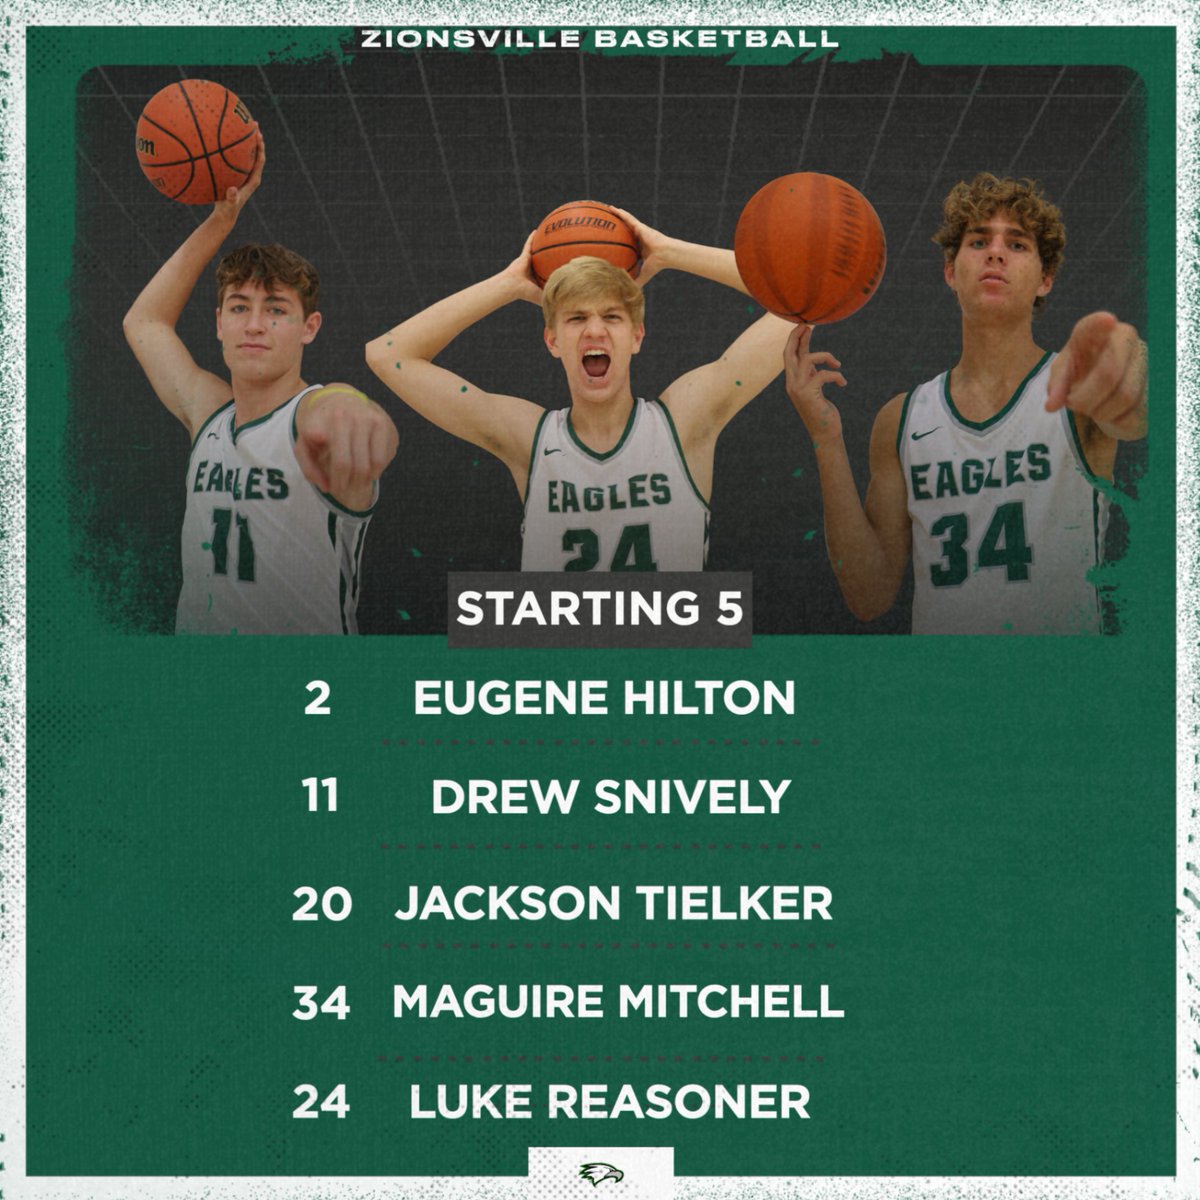 Starting 5
#Rolleags